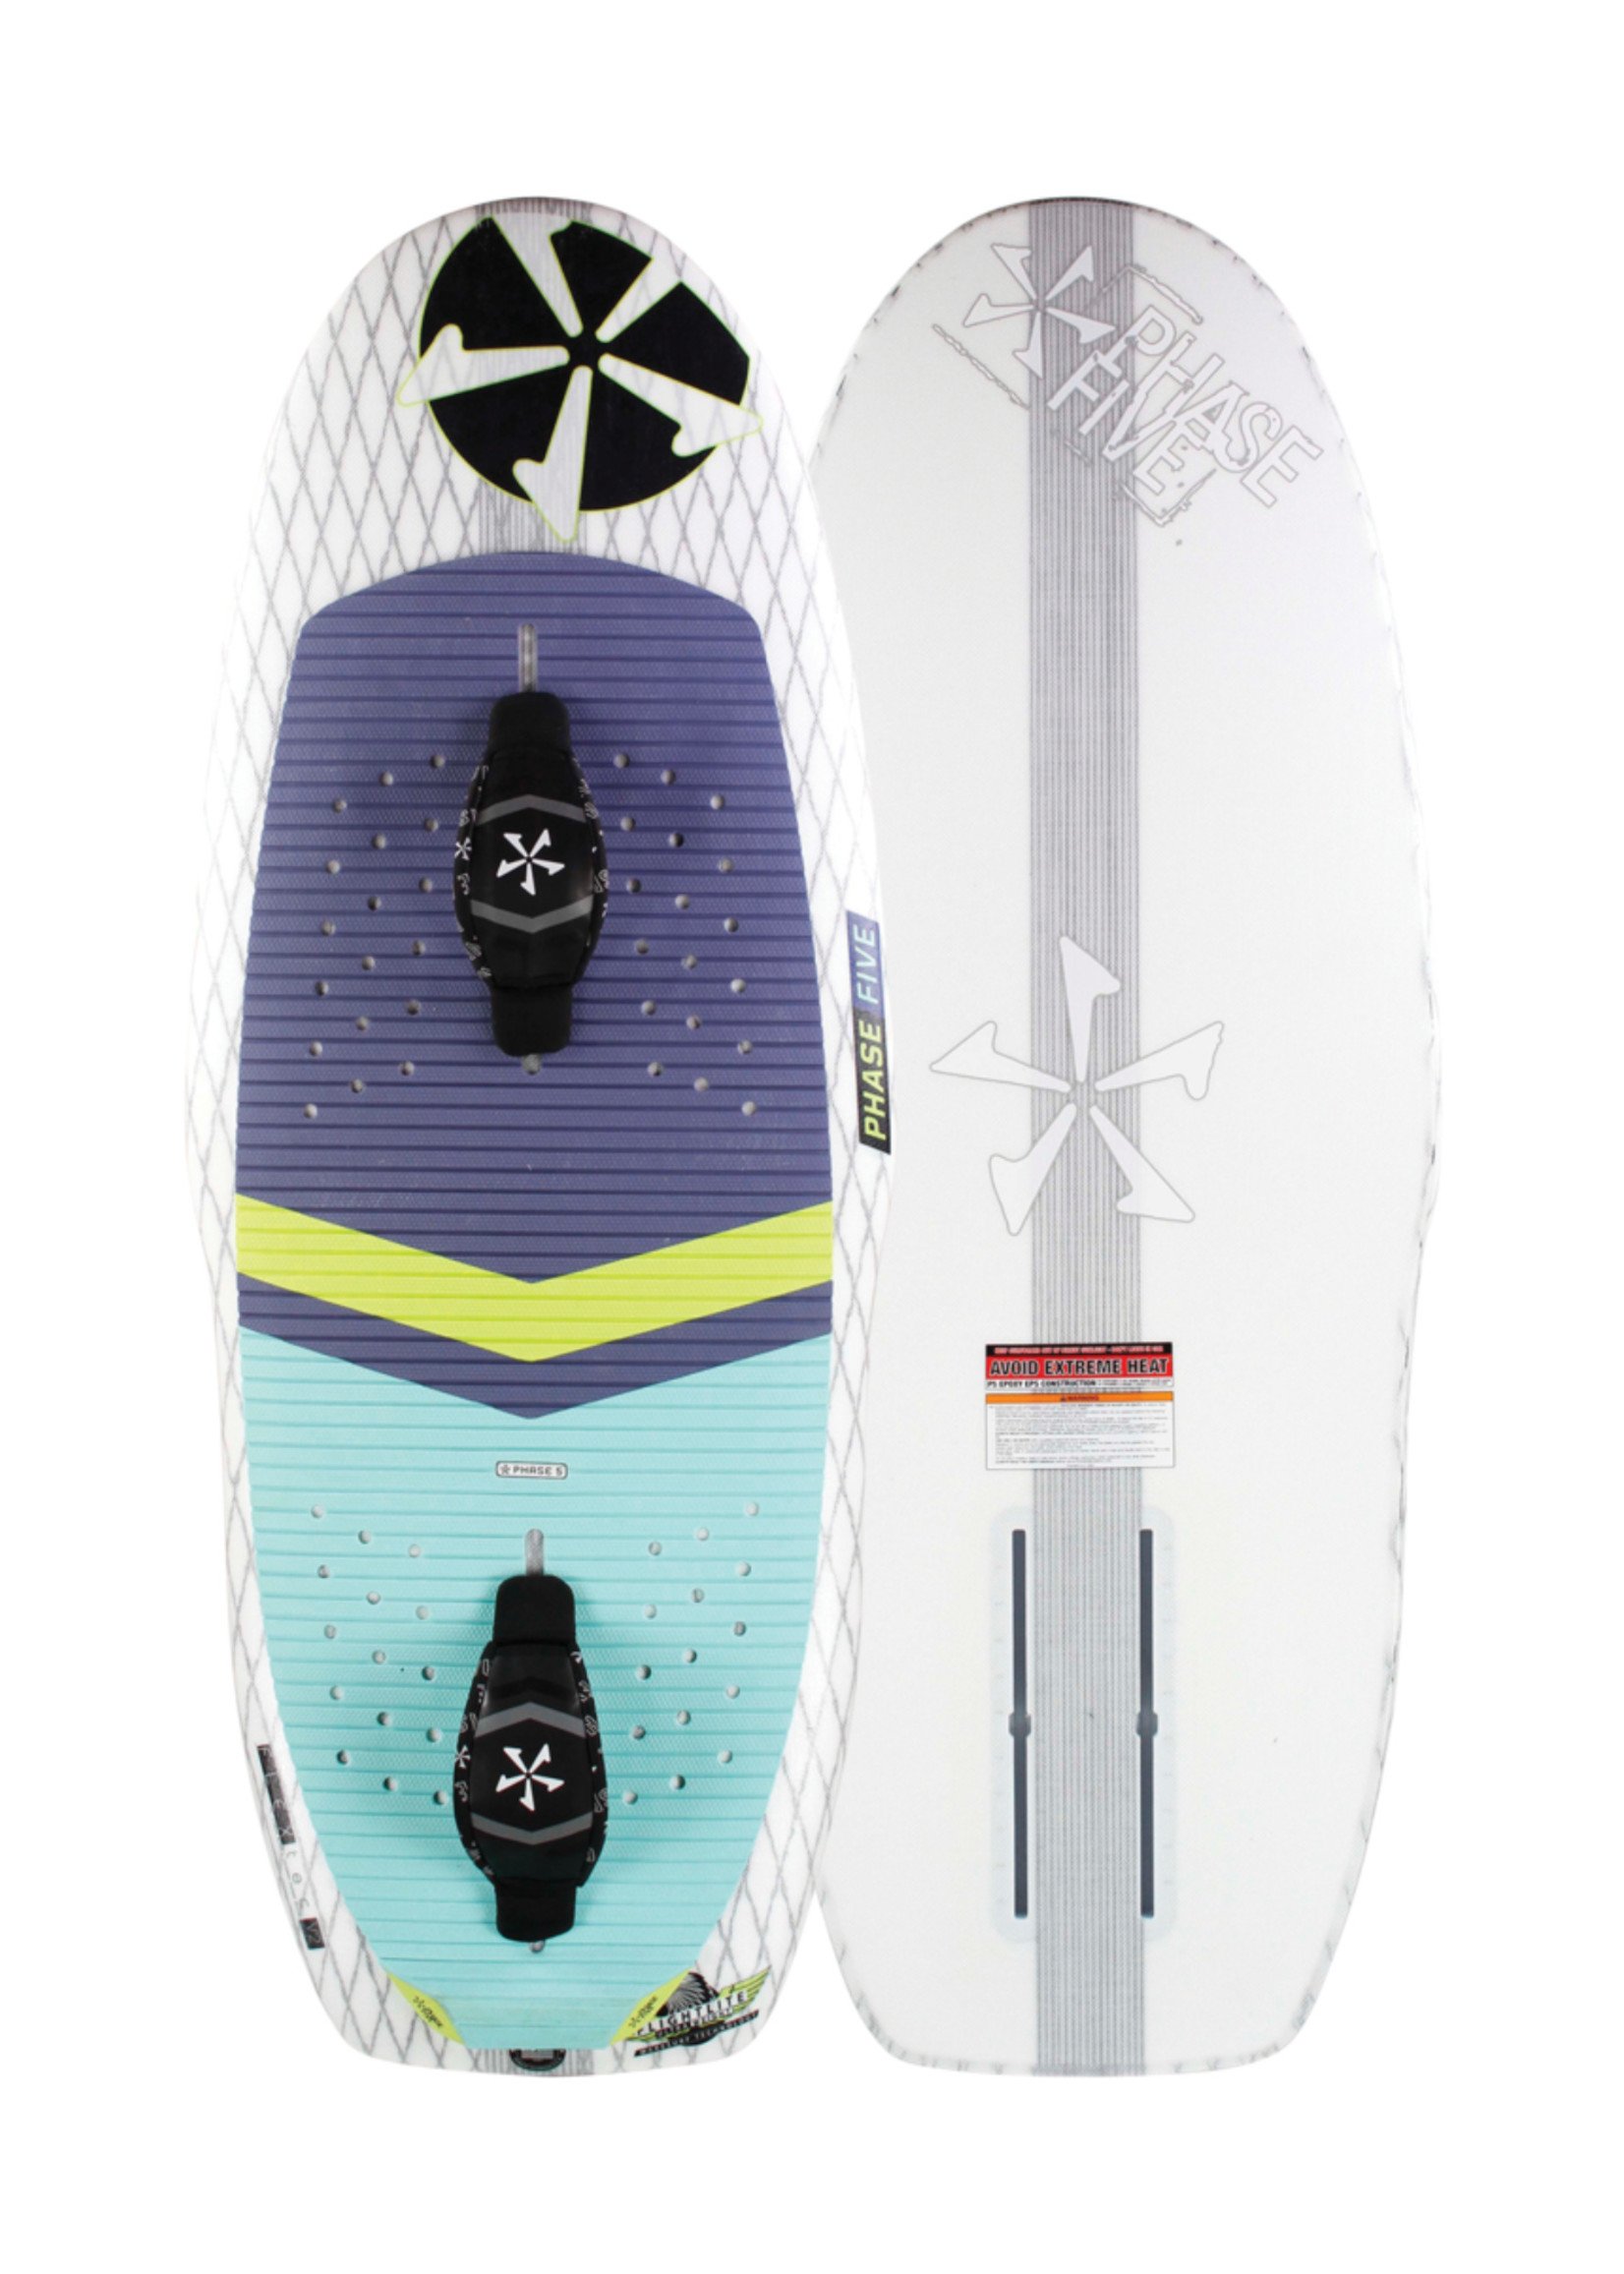 Phase Five Phase Five Gizmo Wakesurf Hydrofoil Board + Foil Package